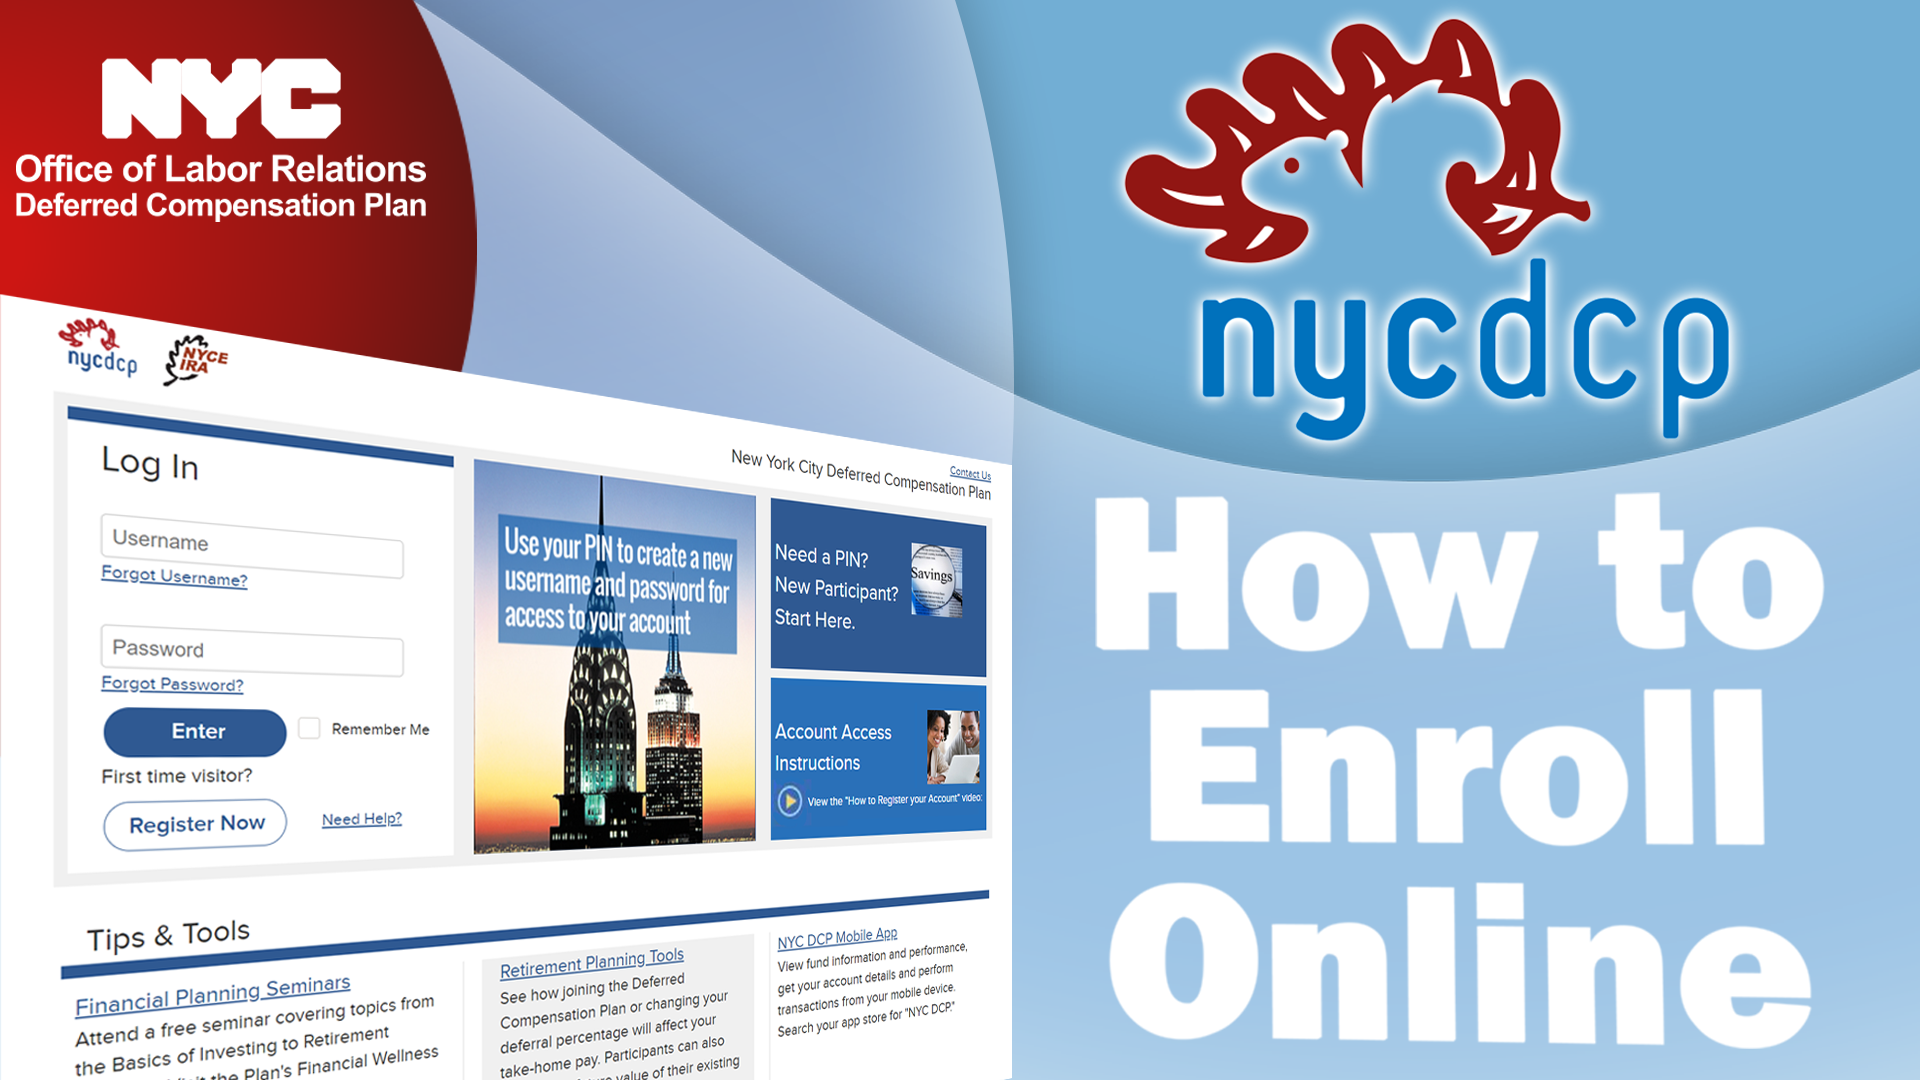 Watch the "How to Enroll Online" video